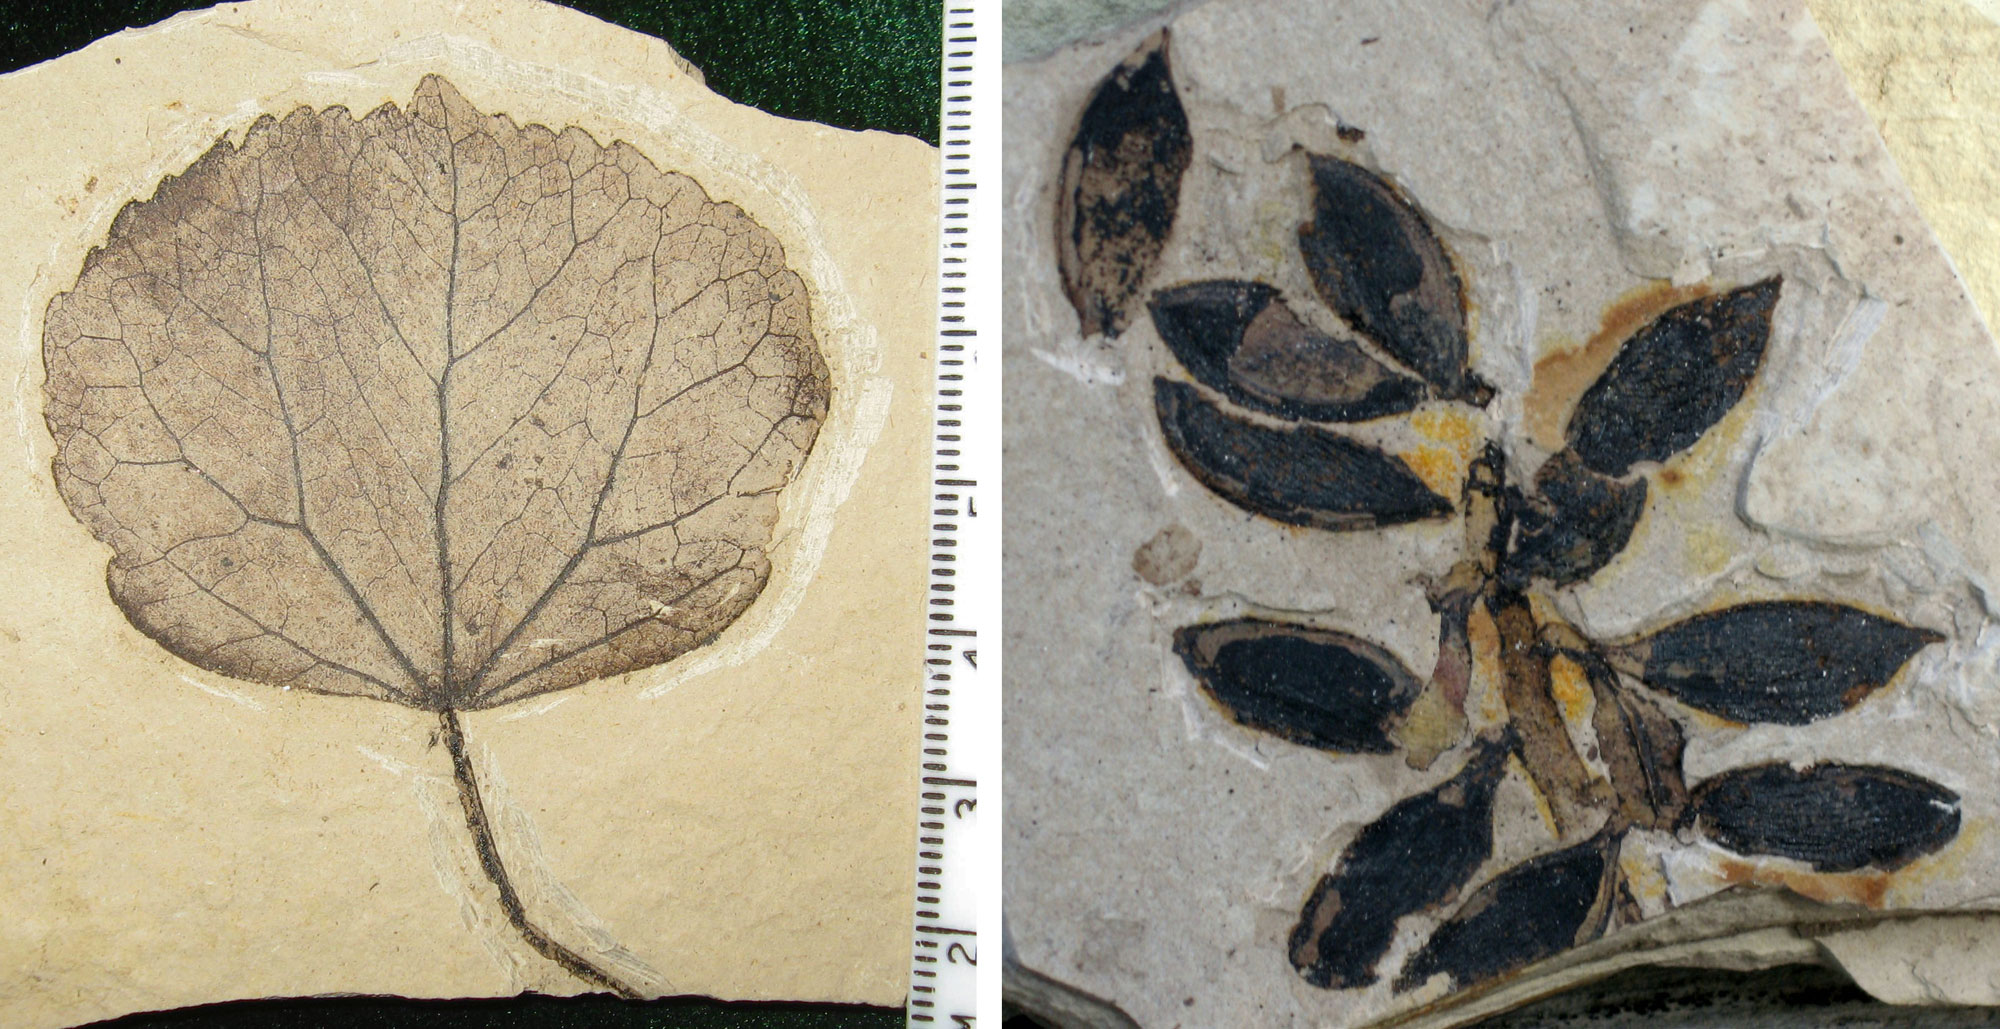 2-panel image of photographs showing fossils of an extinct relative of katsura from the Eocene of Republic, Washington. Panel 1: A leaf. The leaf is simple and round in shape, probably wider than long. The petiole (stalk) is long and the margin to tooted. Multiple primary veins radiate from the leaf base. Panel 2: A infructescence, or group of fruits. The infructescence has a central axis with alternately arranged fruits. The fruits are ellipsoid and pointed at the end. Each fruit has a pedicel, or fruit stalk.